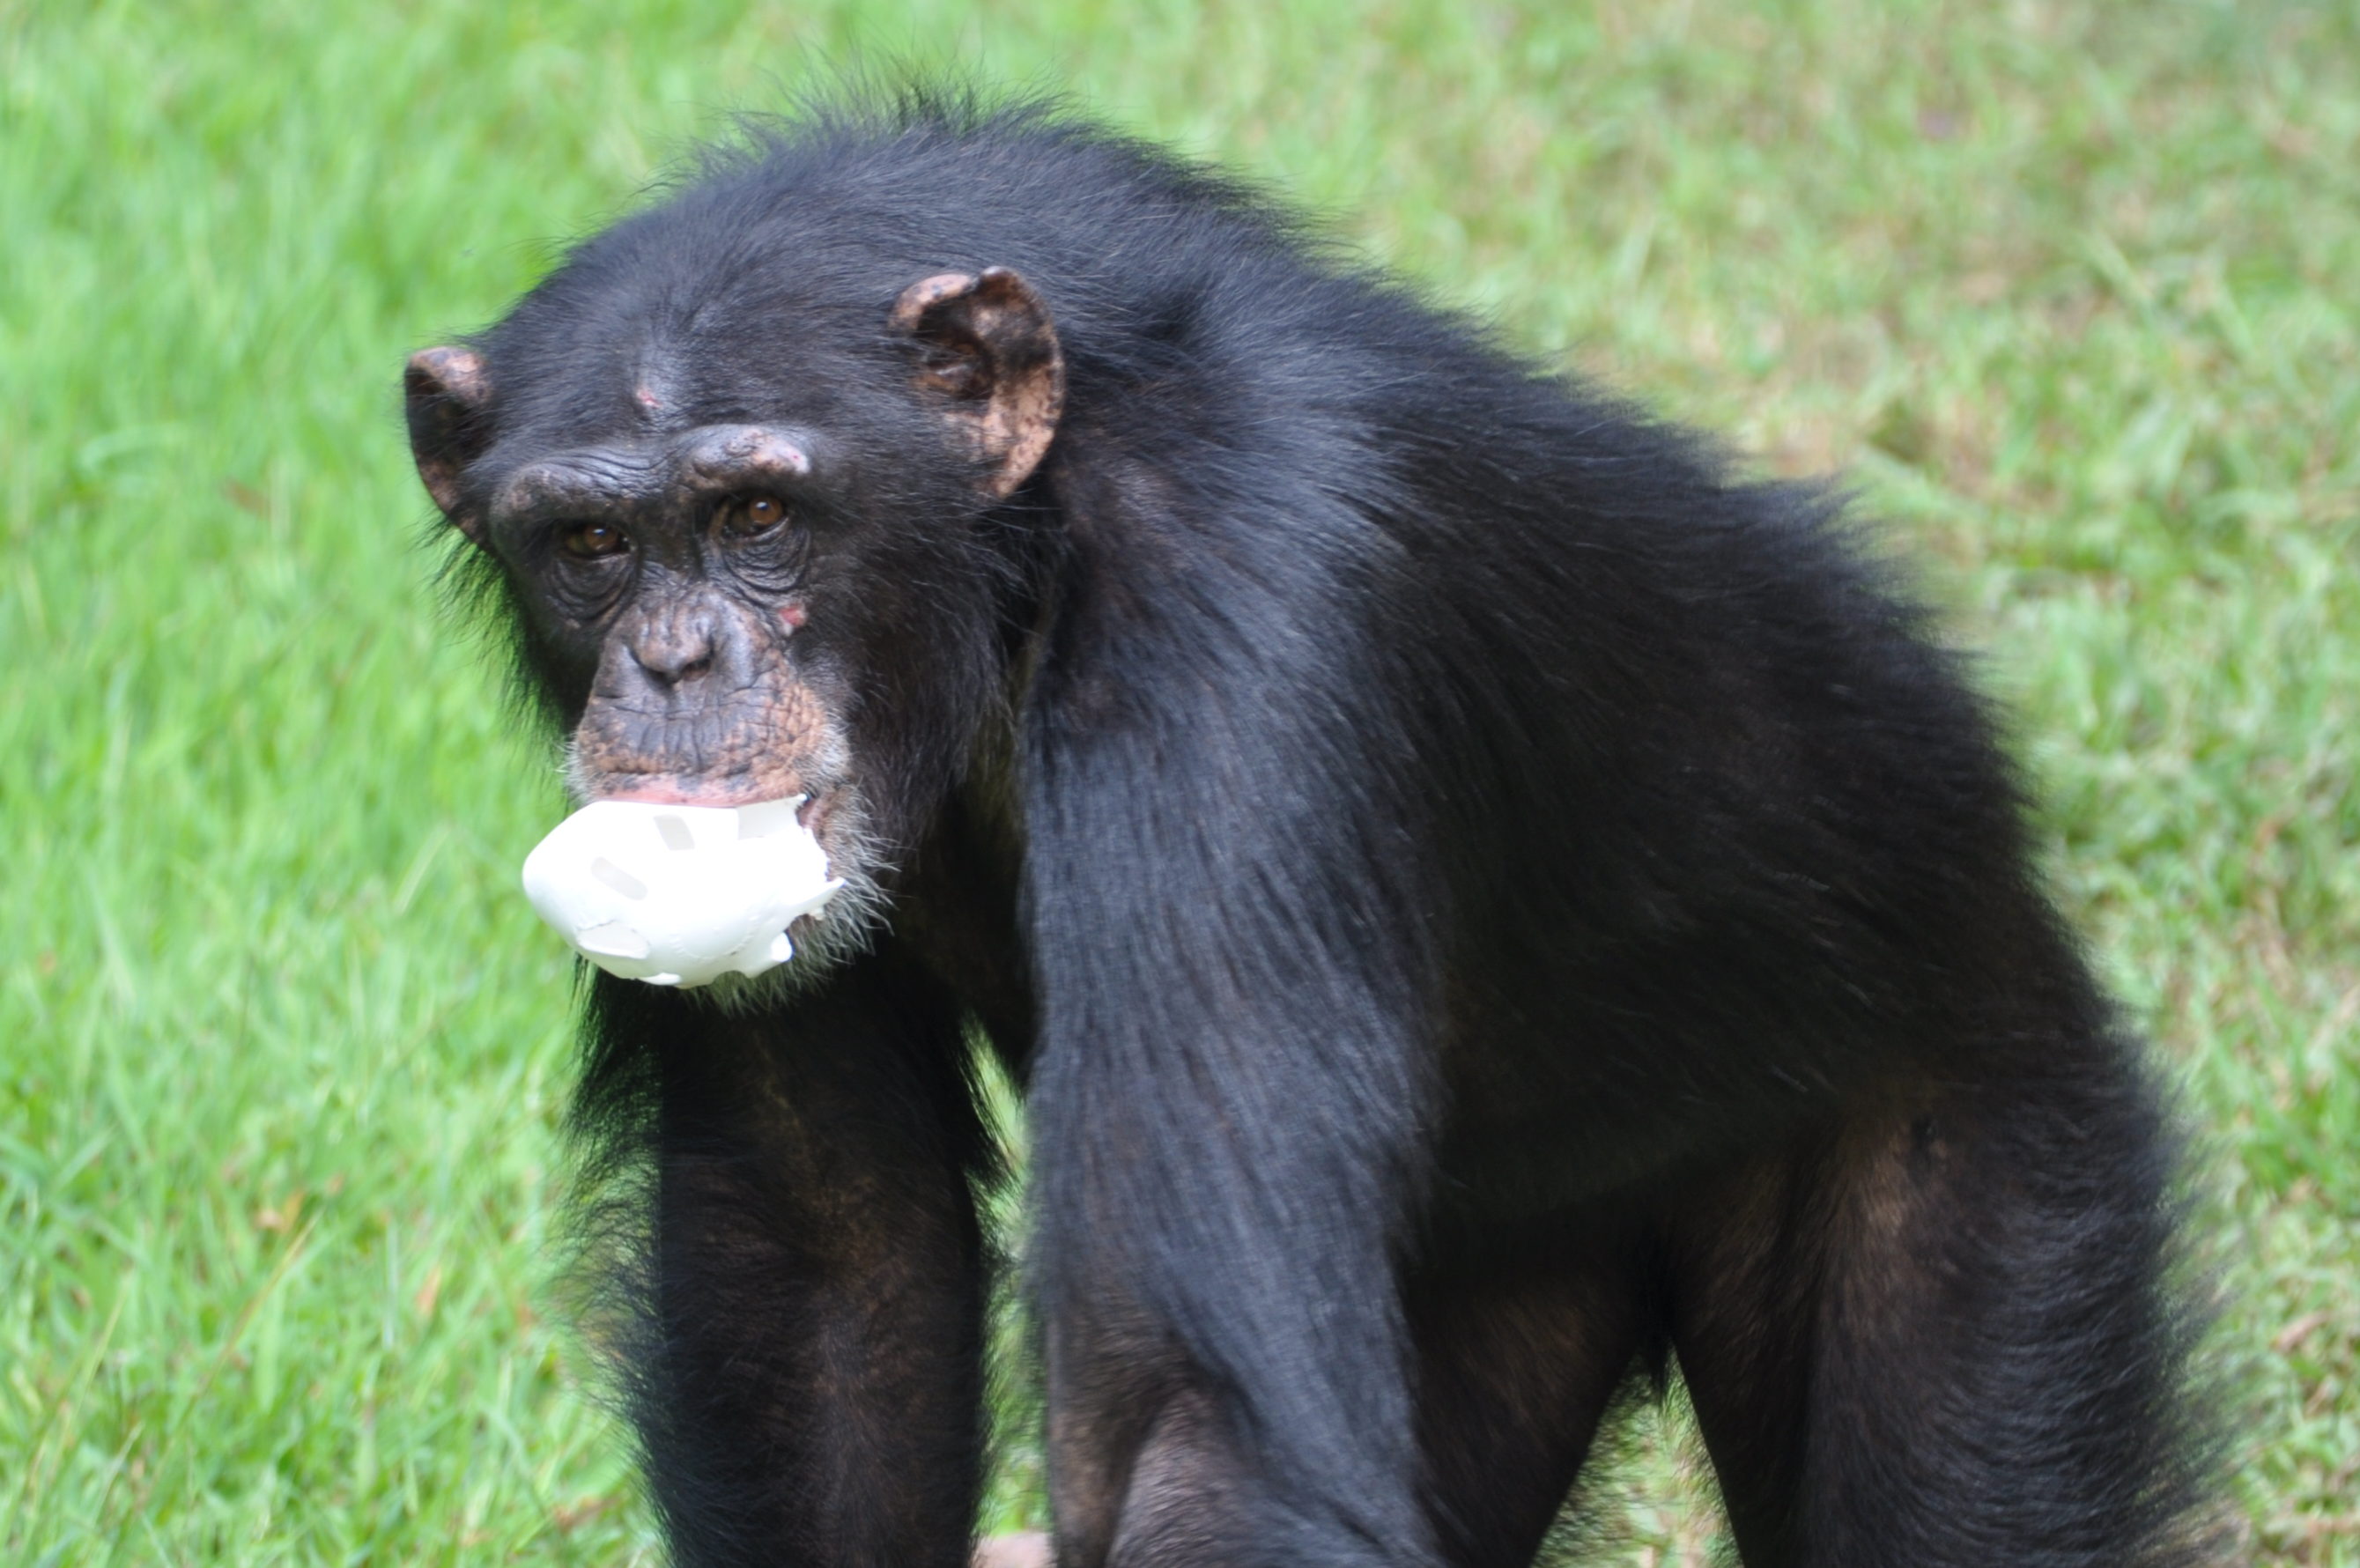 Chimpanzee Haylee with a mouthful of mashed potato outside in the habitat.